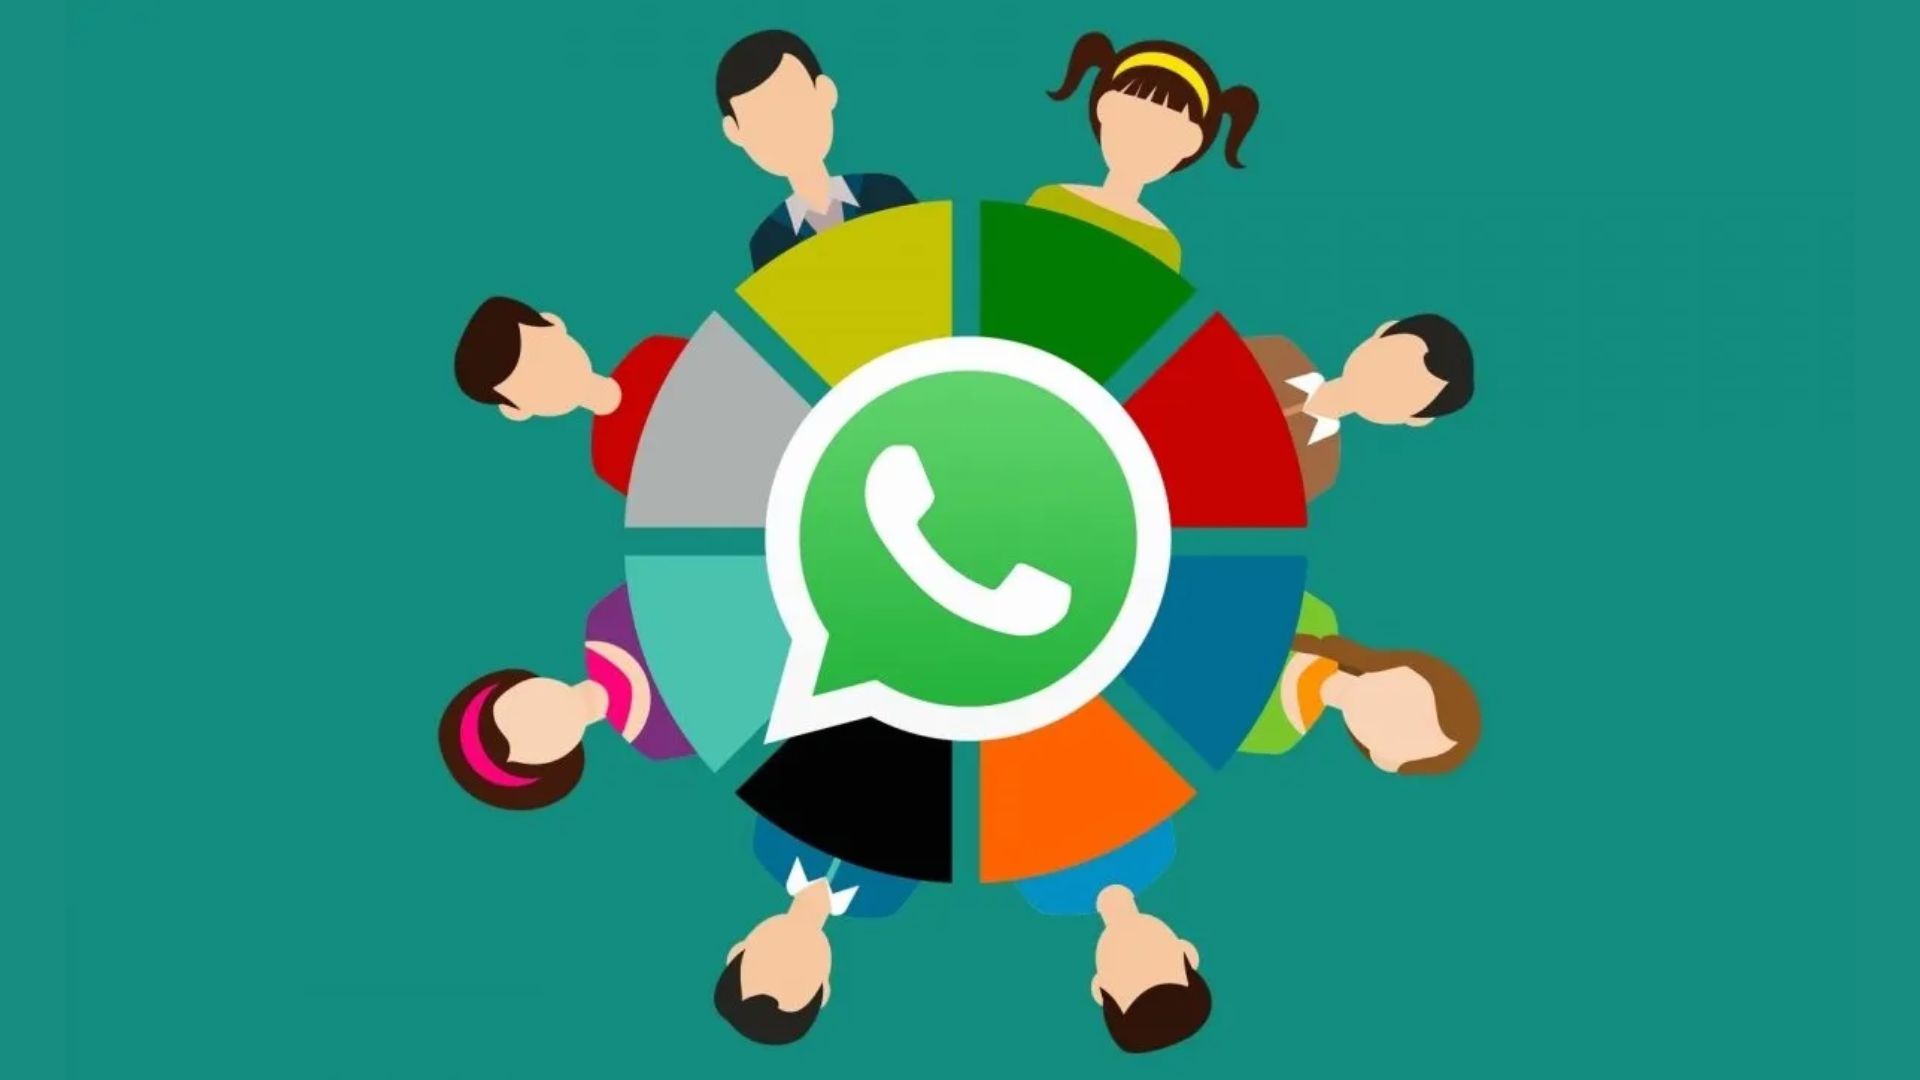 How to Share WhatsApp Group Link? 3 Easy Ways